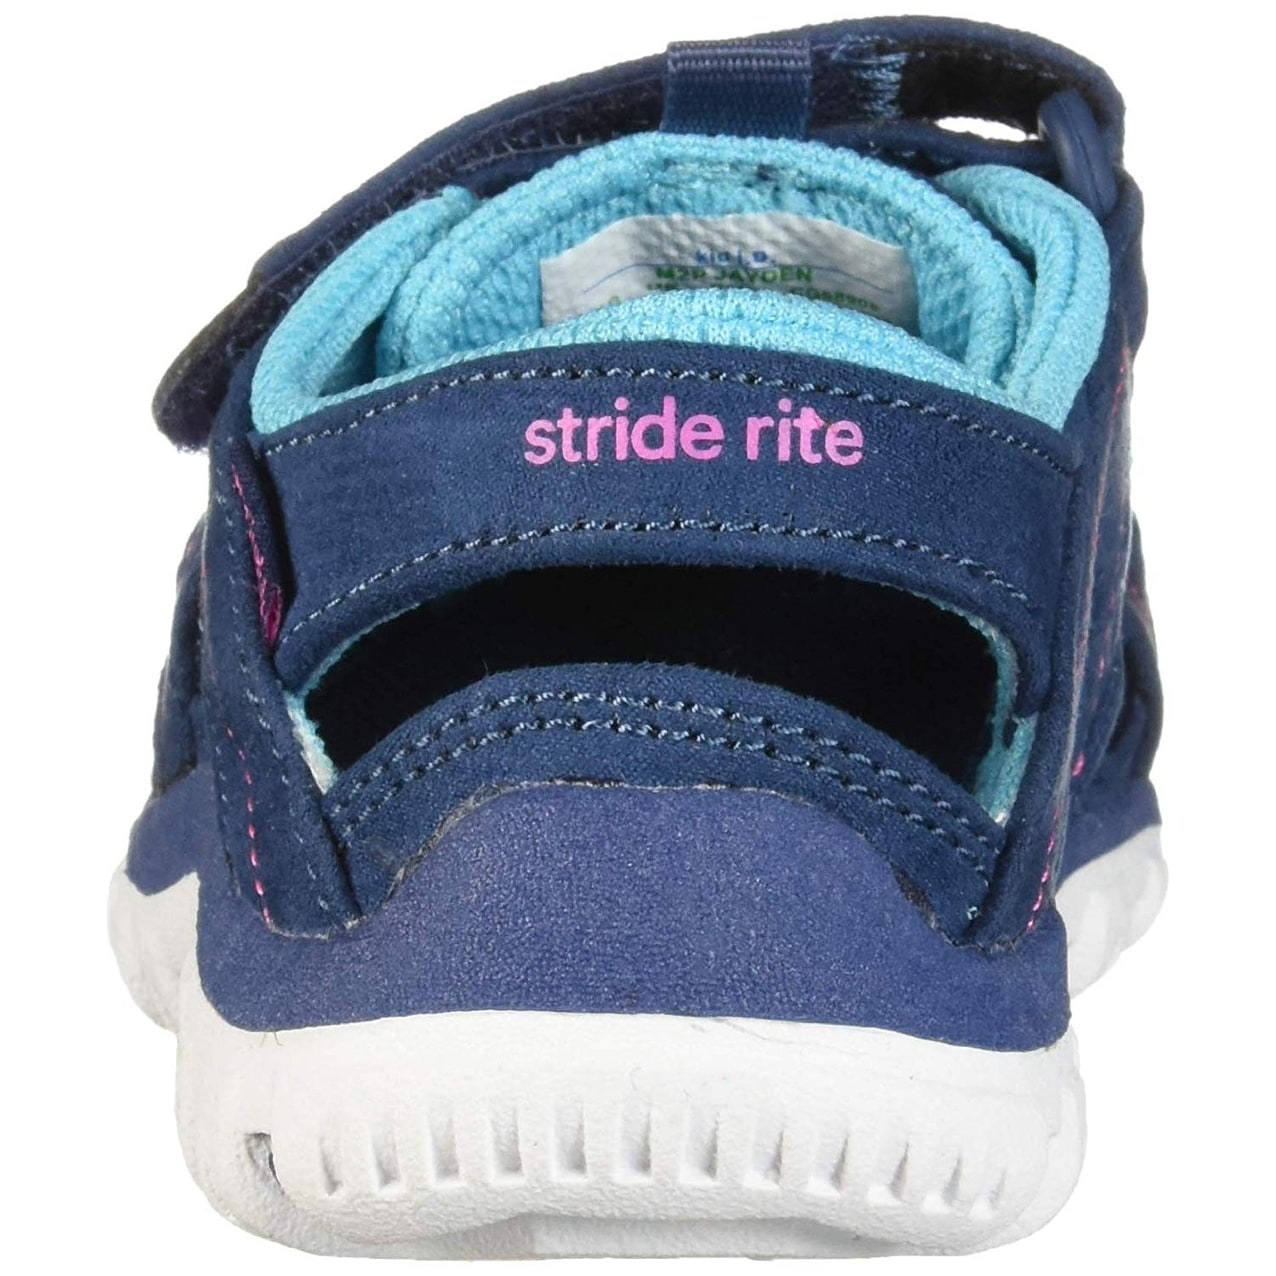 stride rite made to play